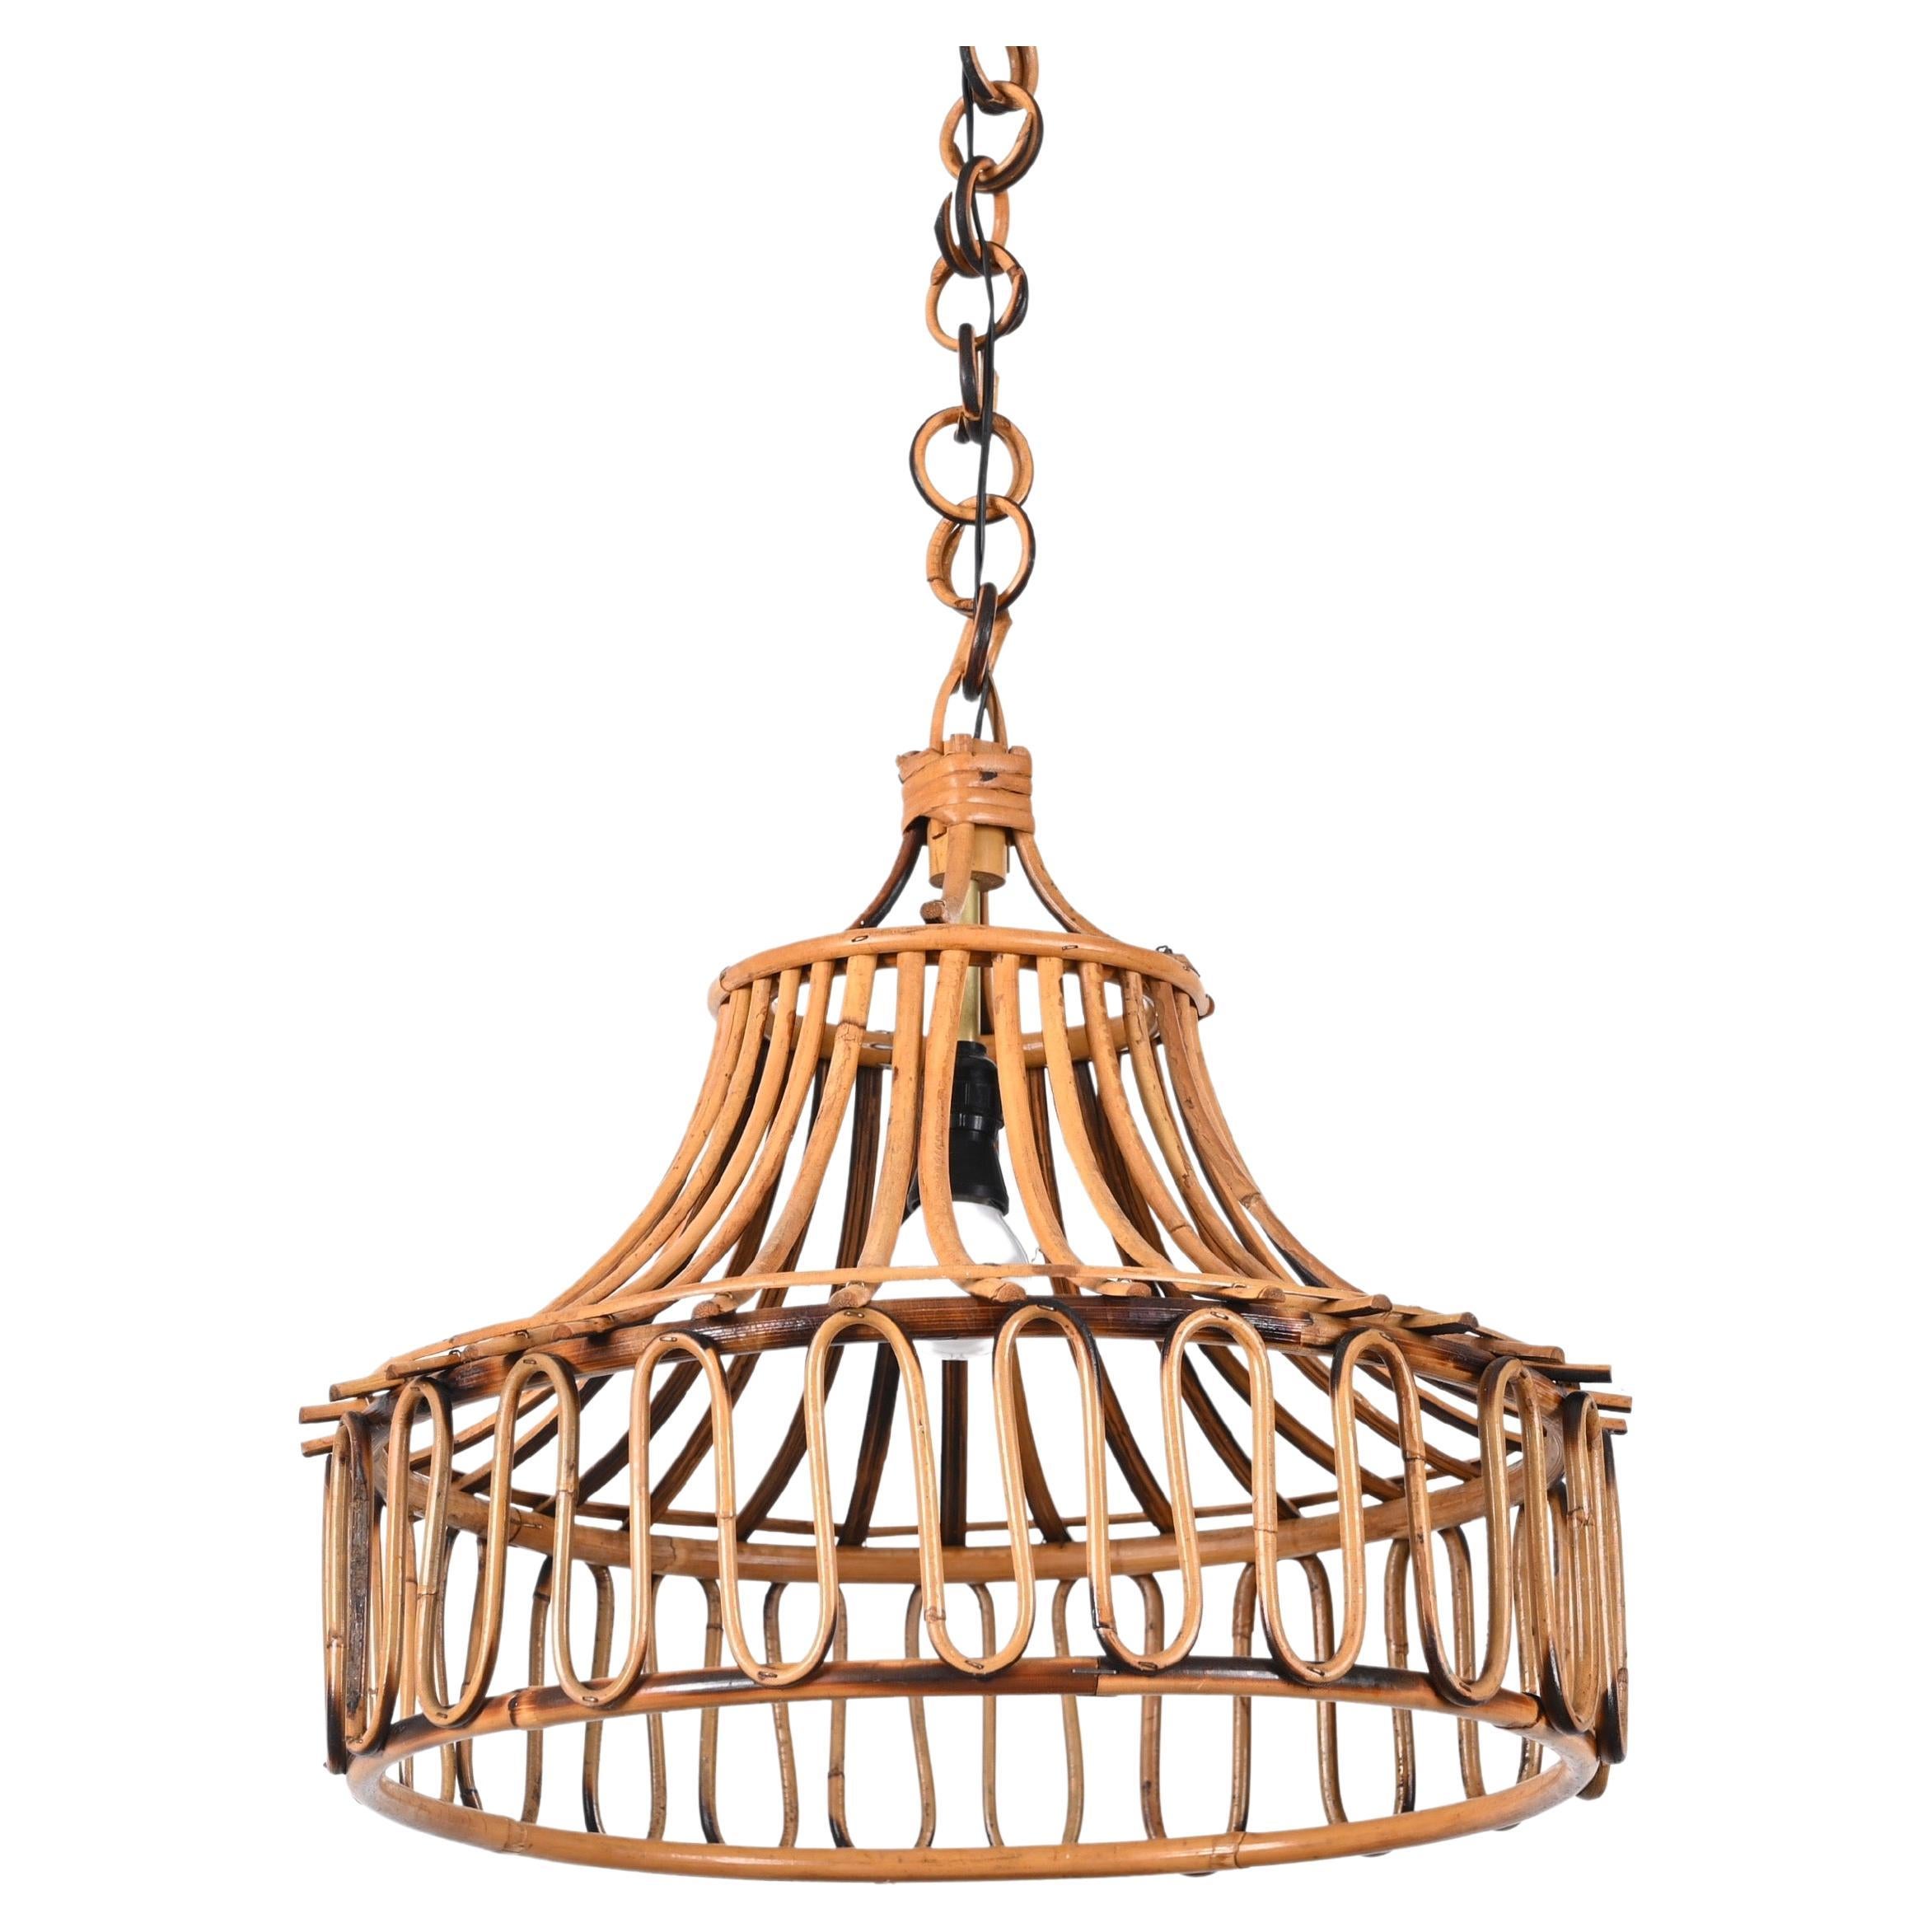 Midcentury French Riviera Bambo and Rattan Round Italian Chandelier, 1960s For Sale